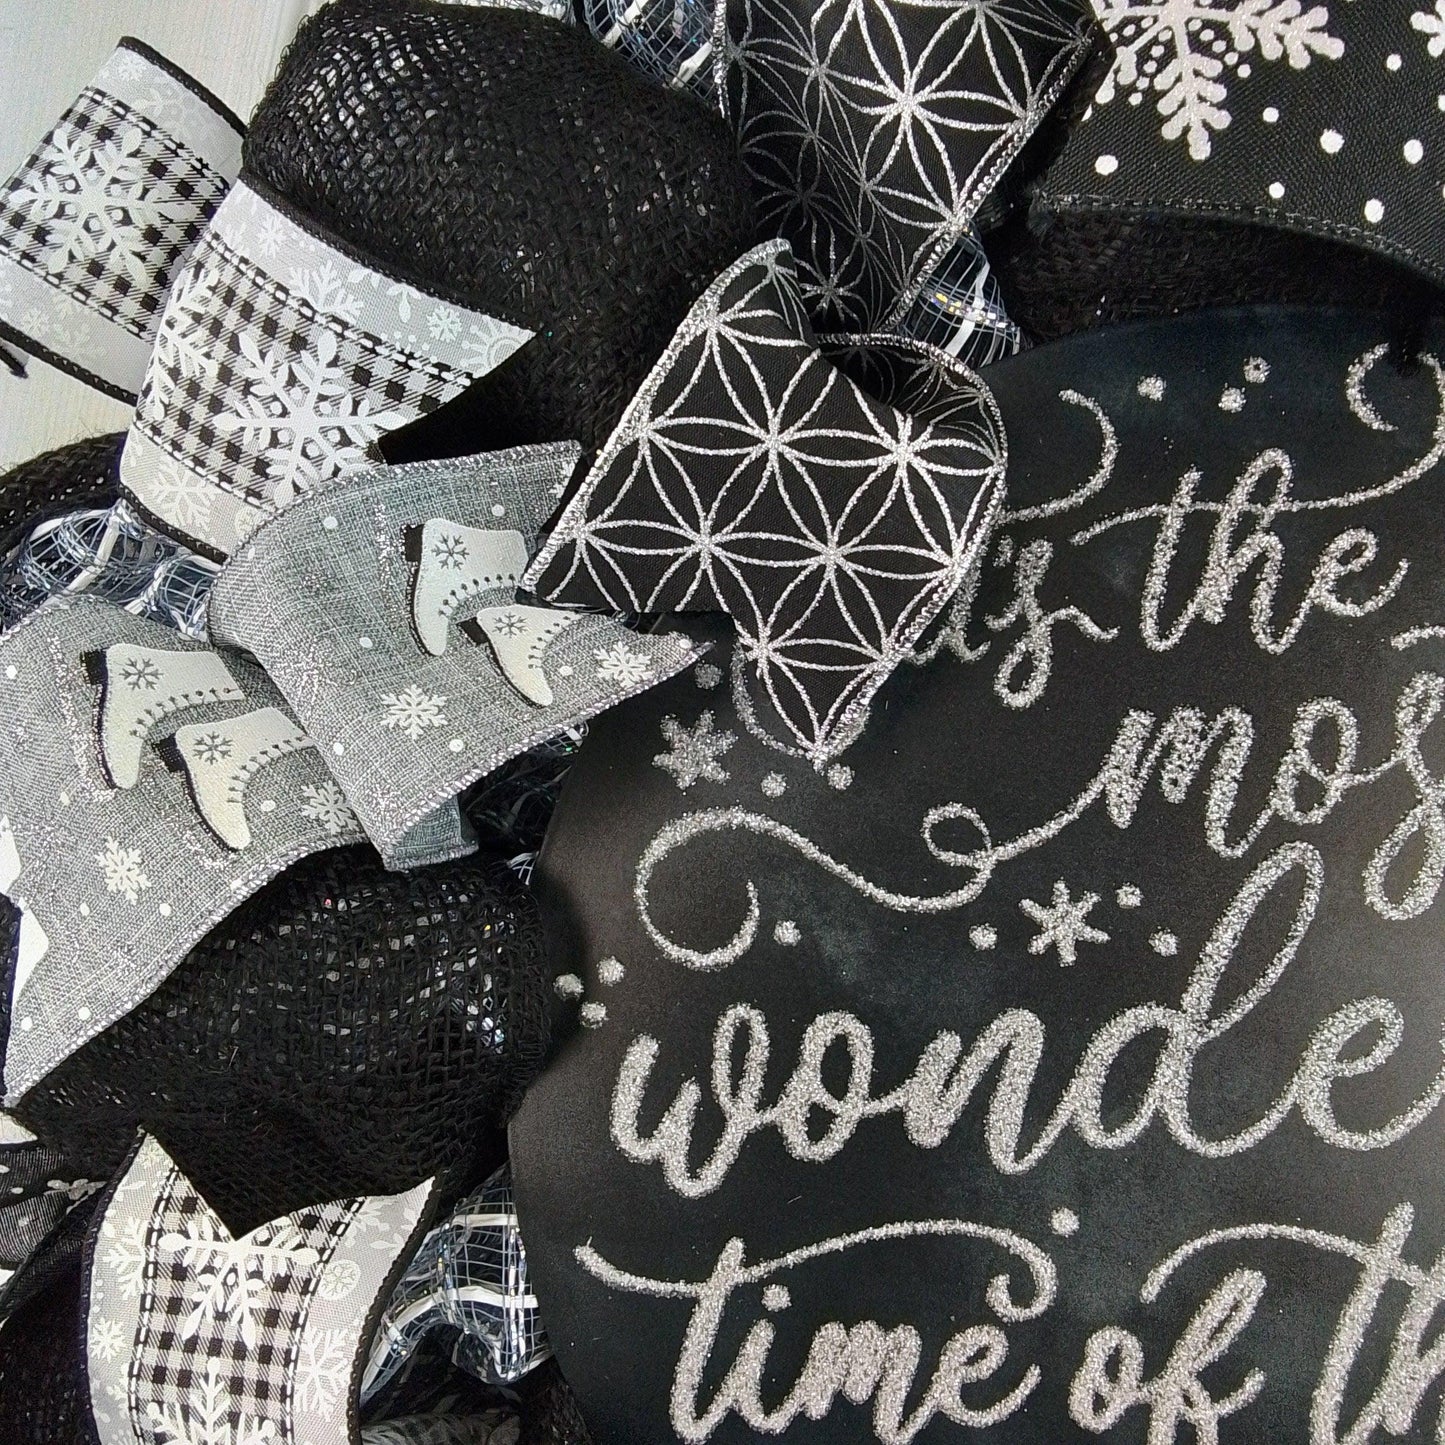 Winter Wreath - It's the Most Wonderful Time of the Year Christmas Mesh Outdoor Front Door Wreath; White Black Grey Silver - Pink Door Wreaths